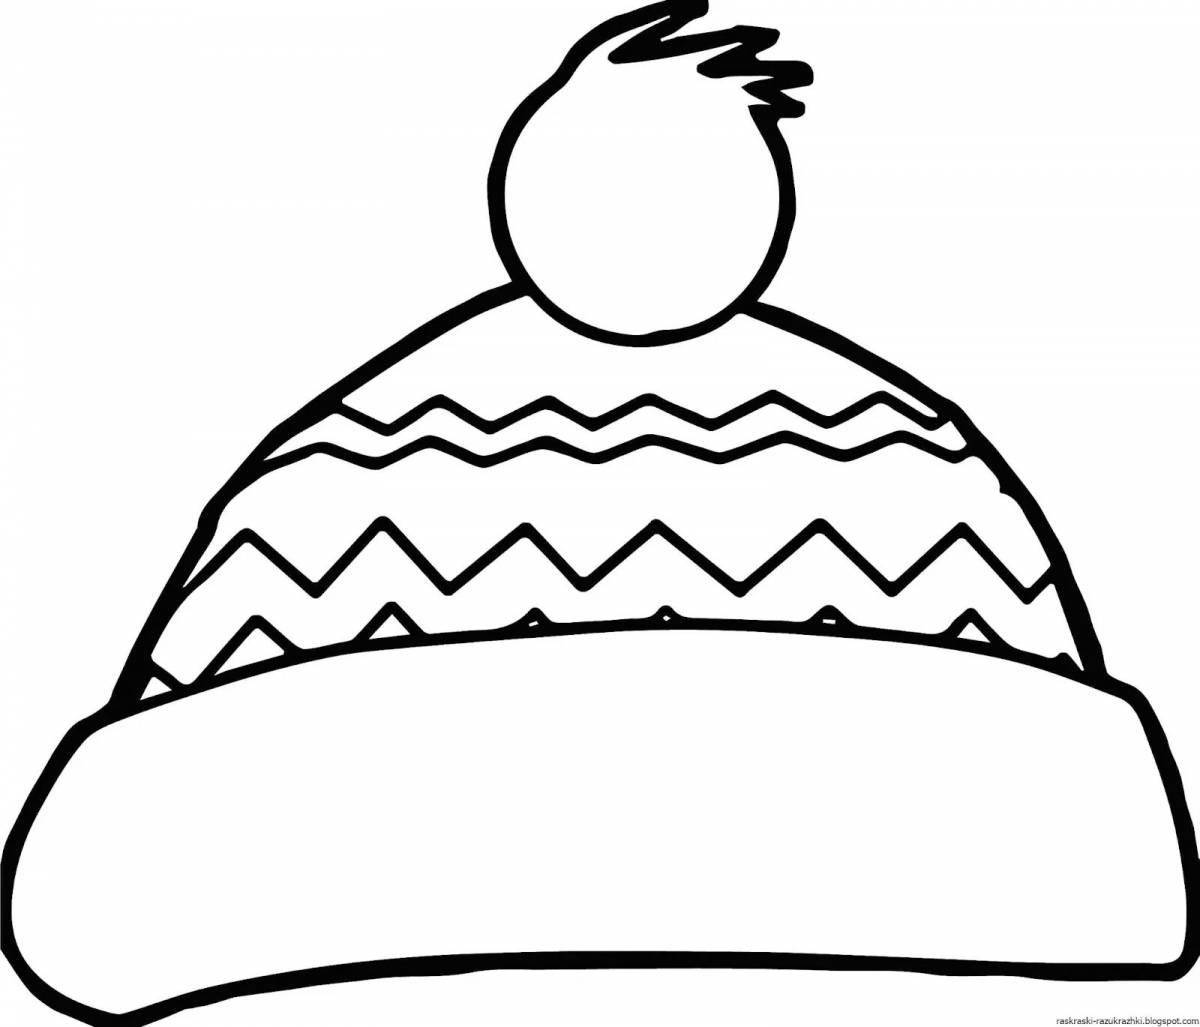 Decorated winter hat coloring book